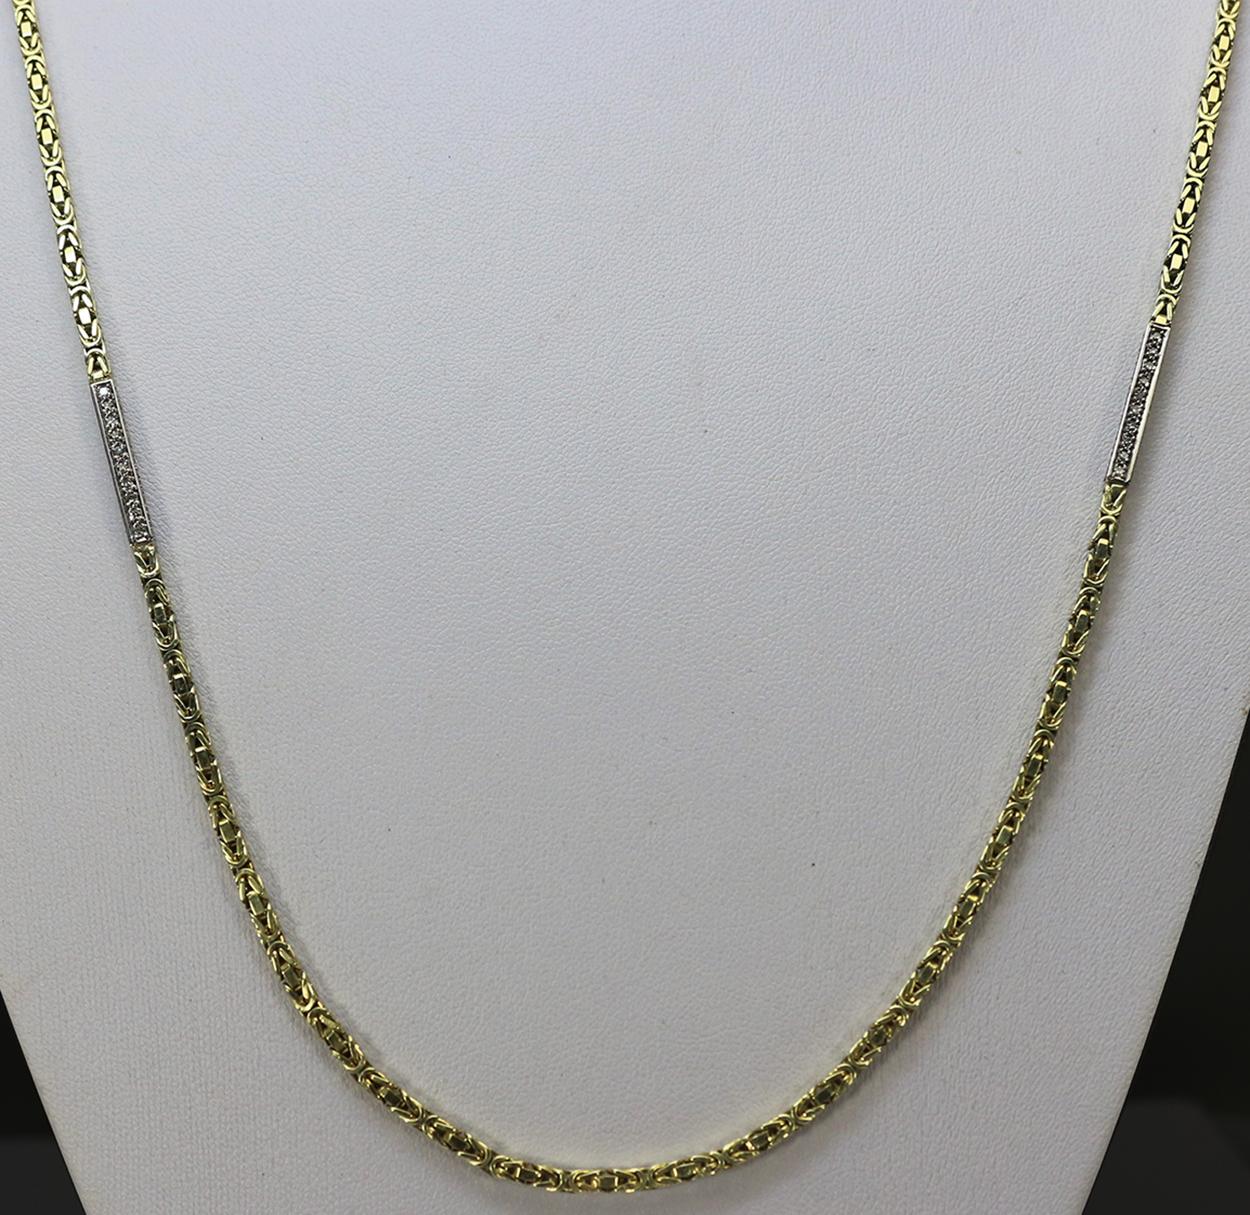 Women's or Men's Handcrafted 14K Gold King's Chain with 2.4ct Diamonds For Sale